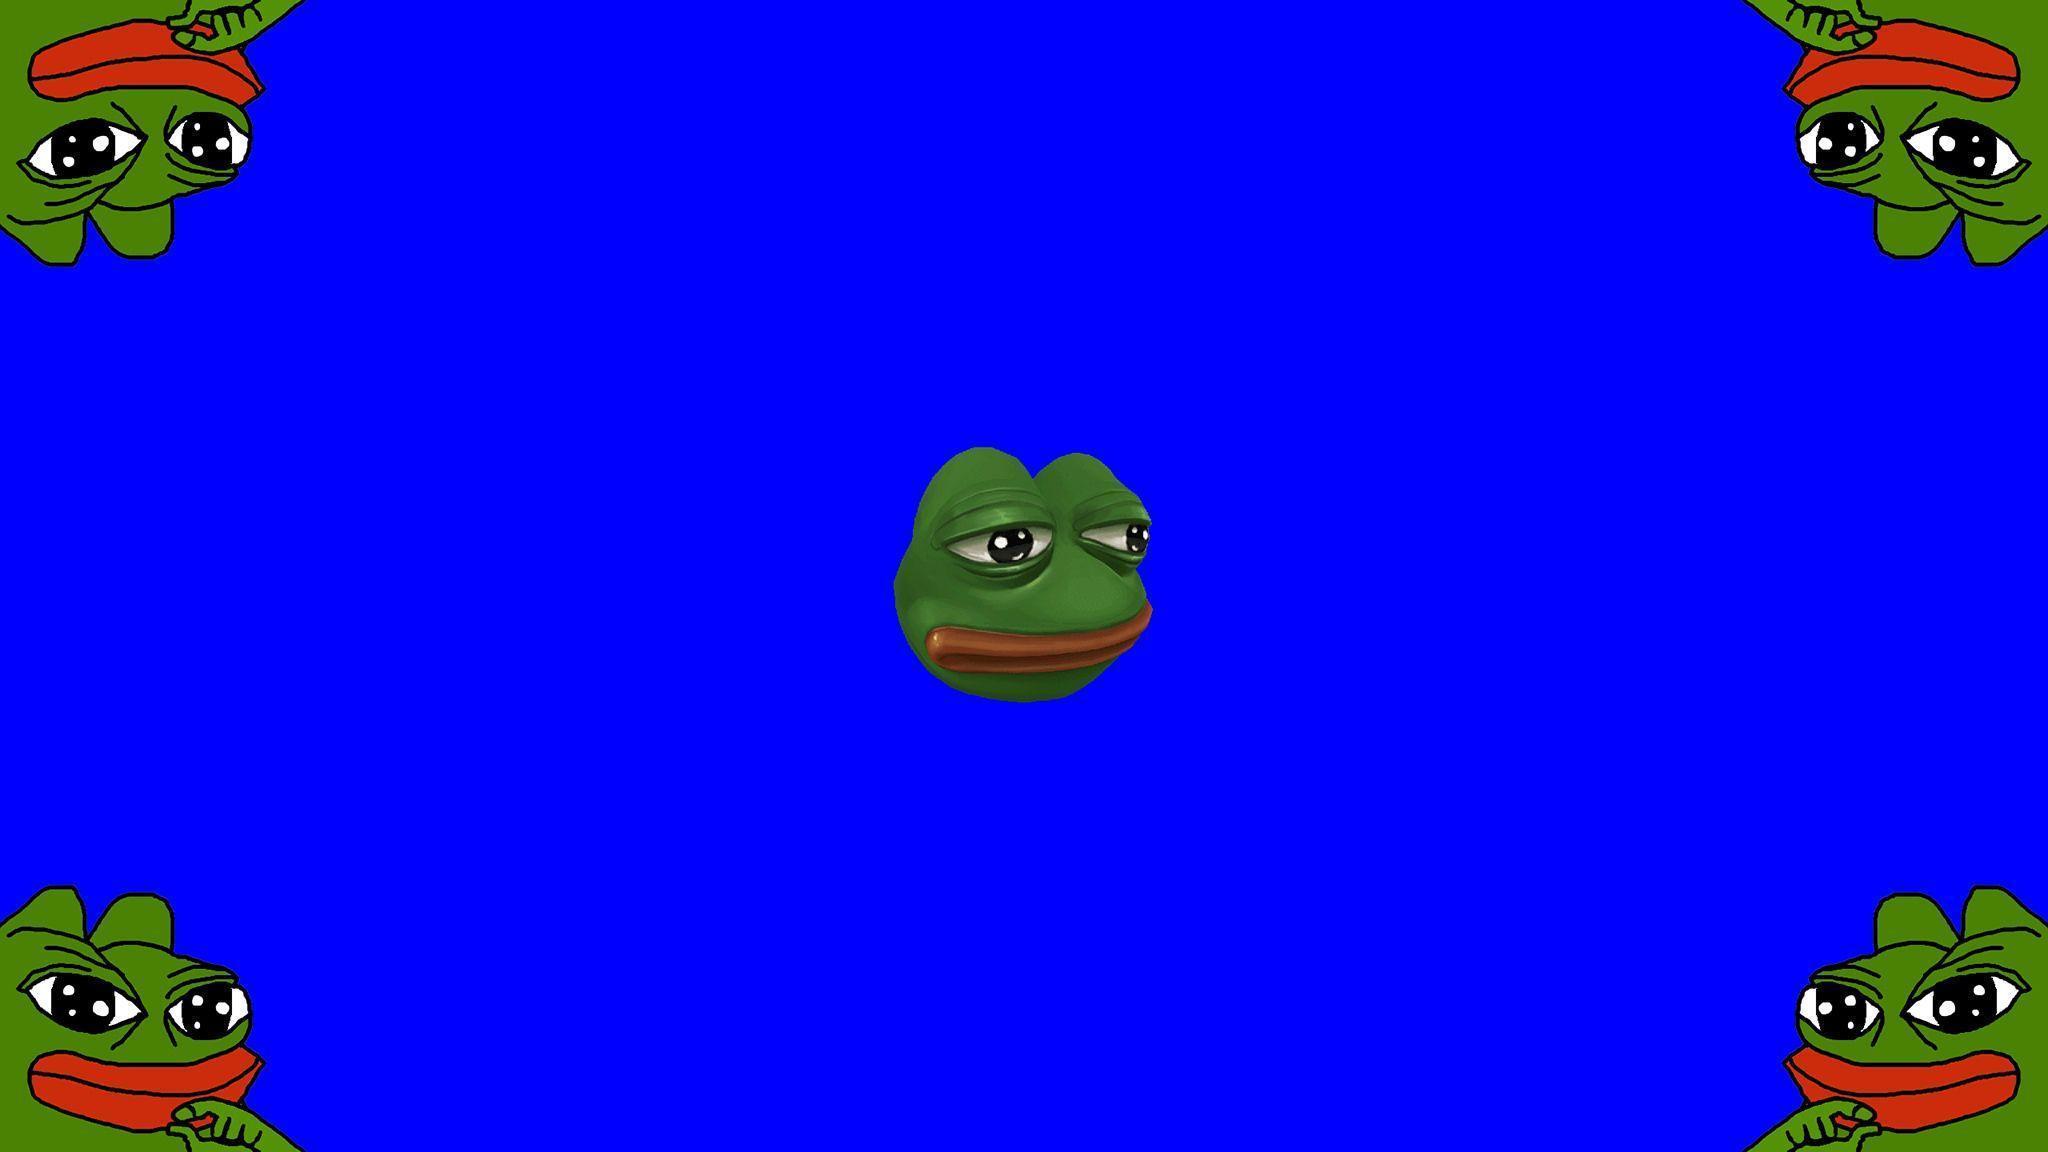 SavePepe: When Did Pepe The Frog Get So Angry?